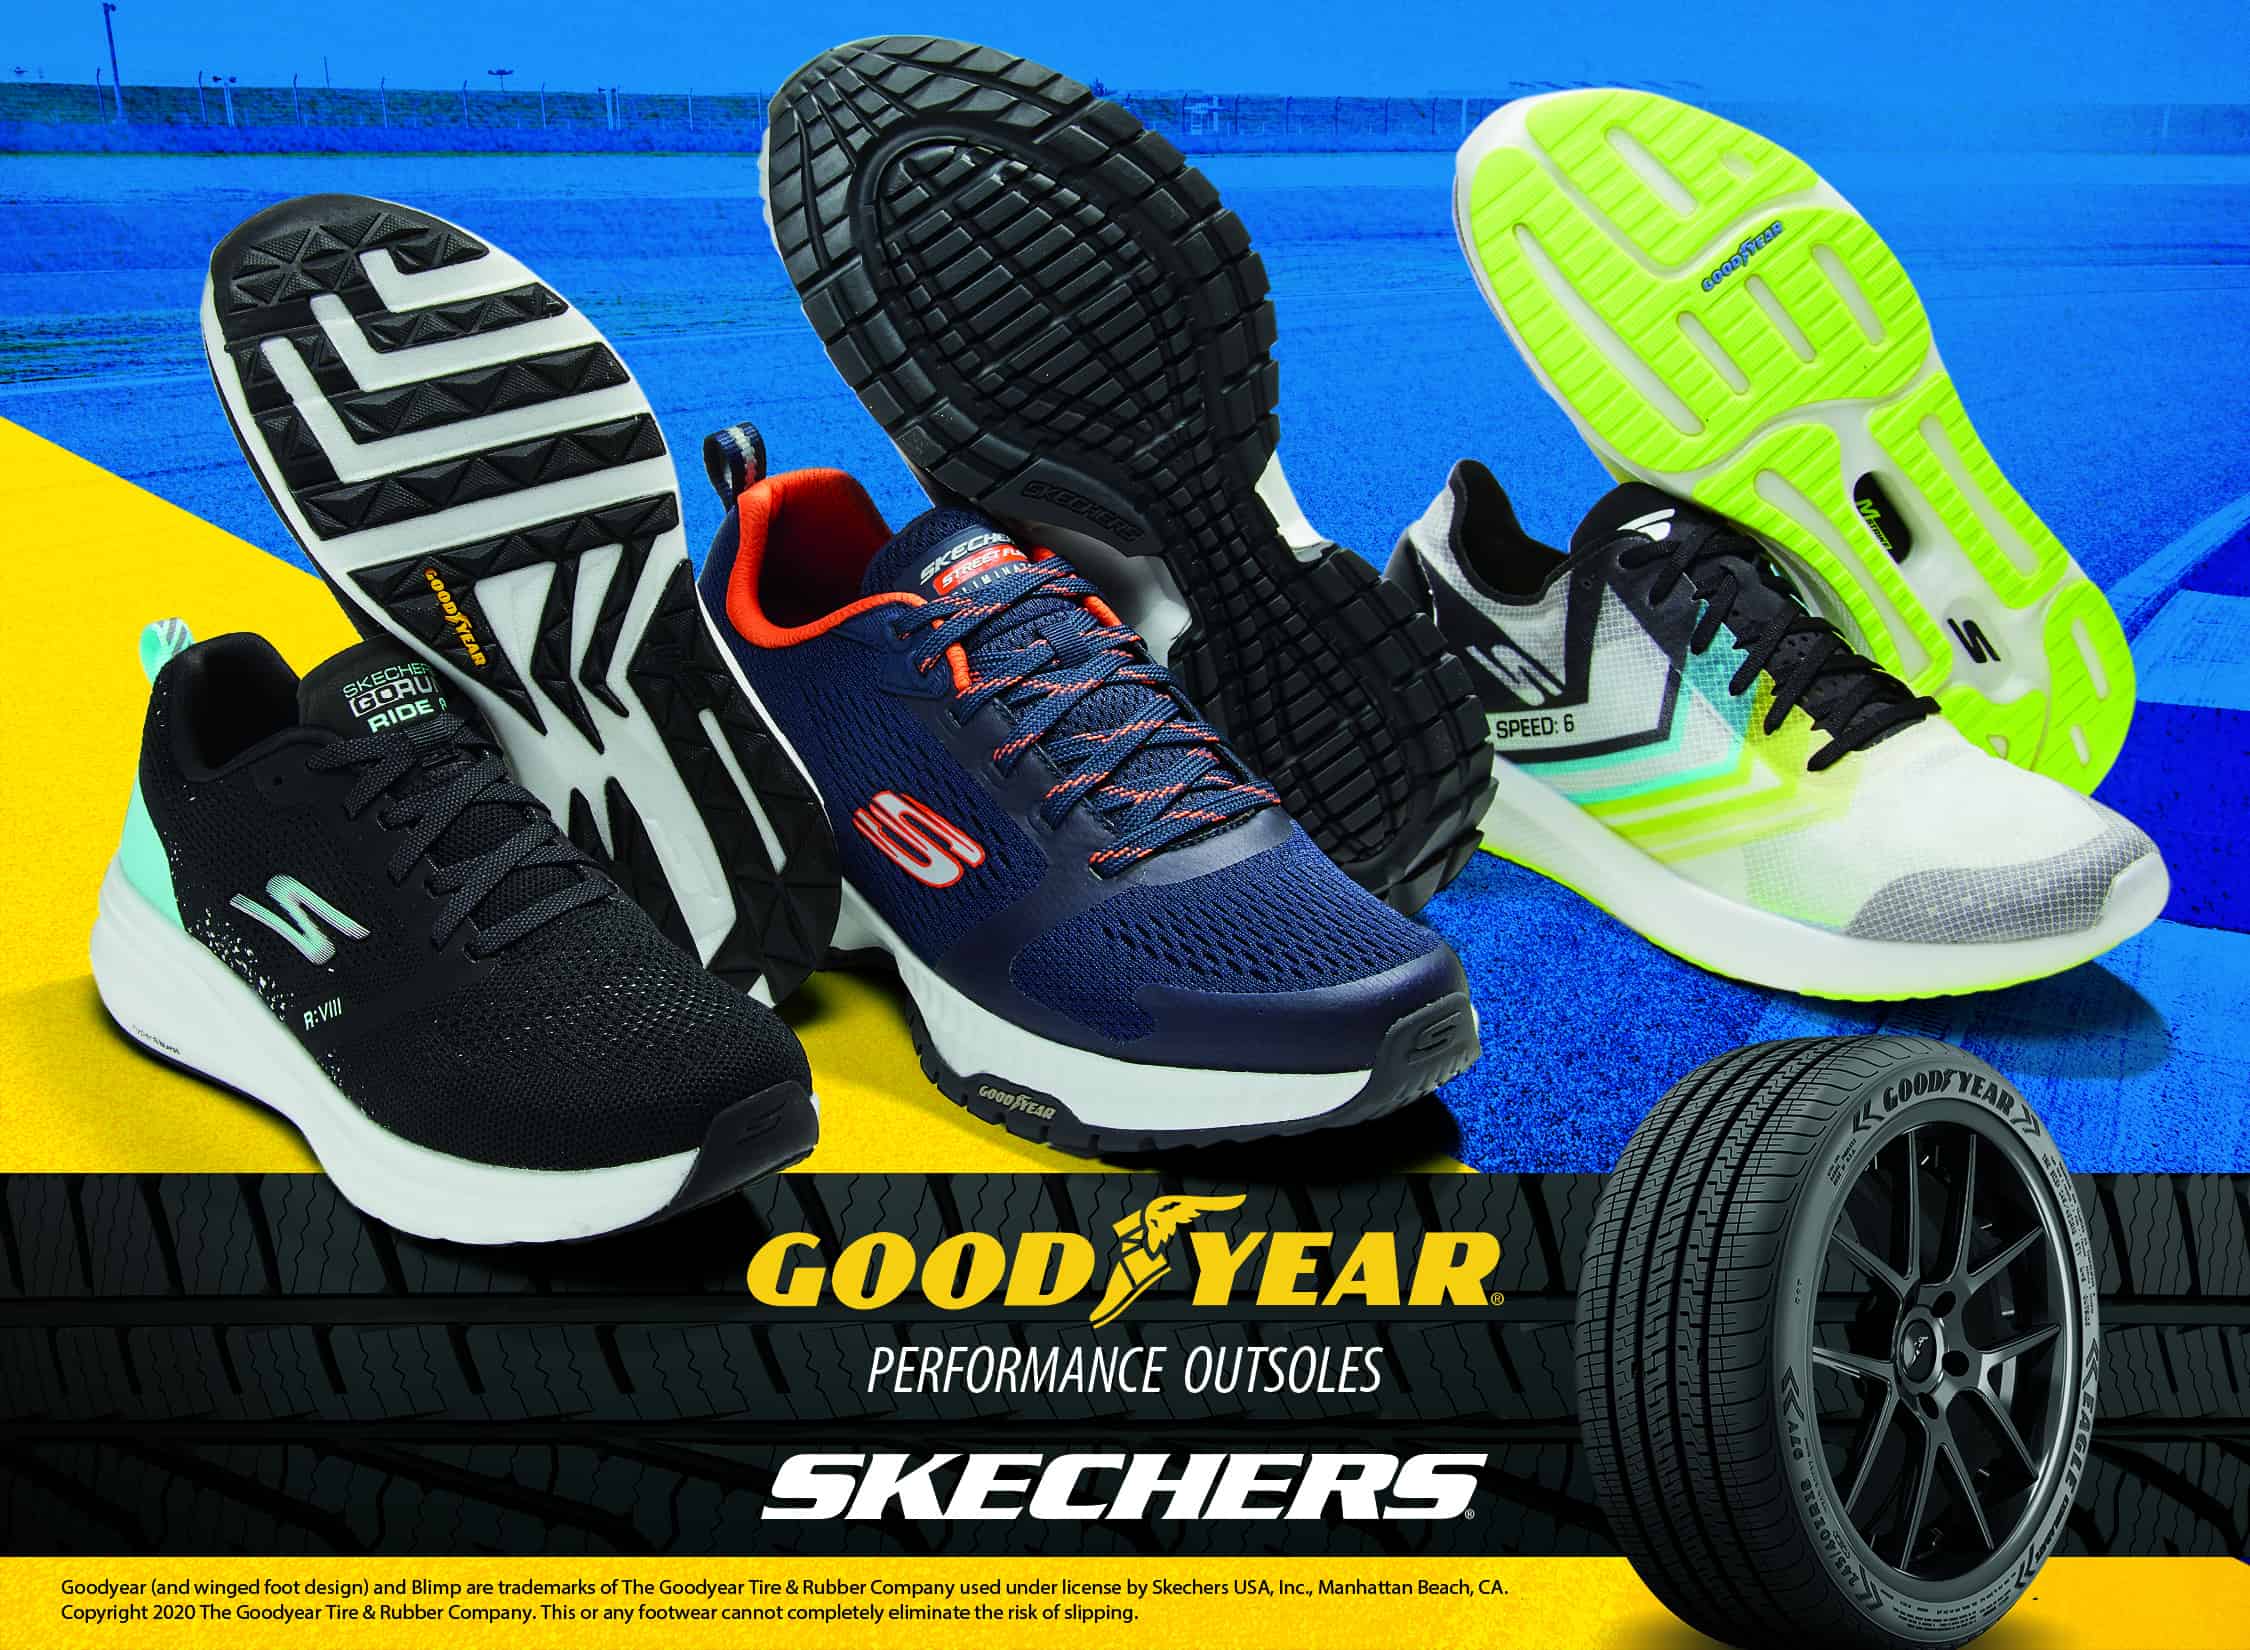 Skechers and Goodyear 